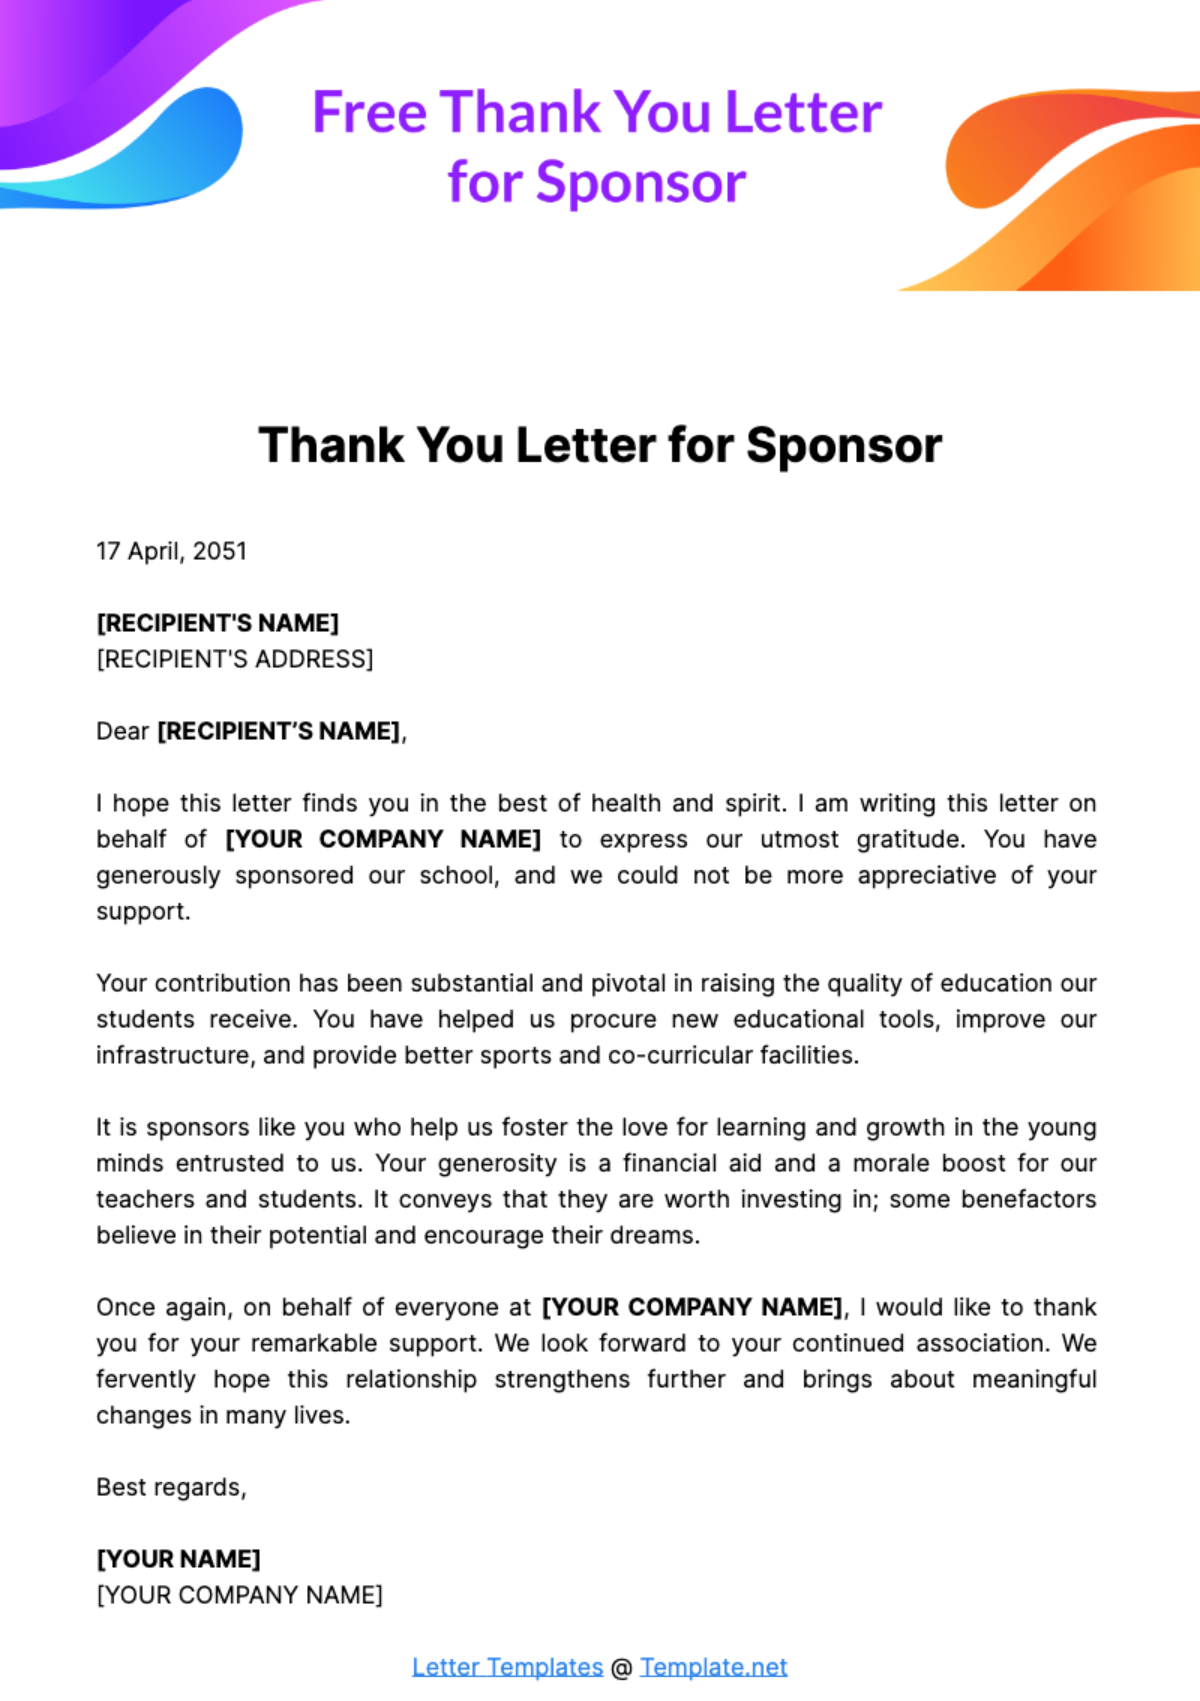 Free Thank You Letter for Sponsor Template